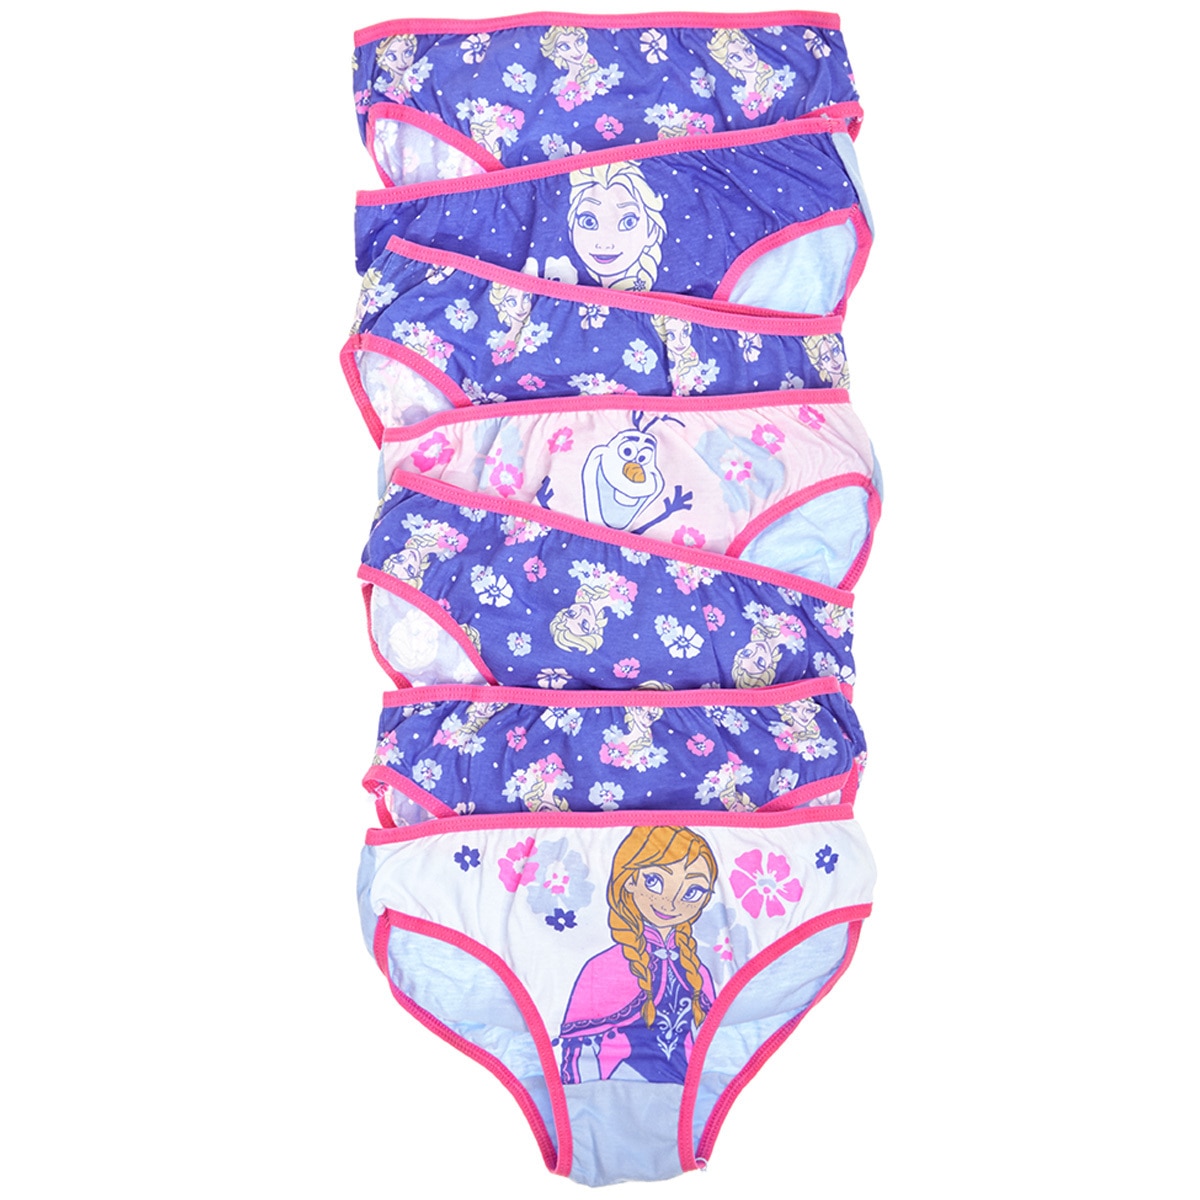 Ladies, now you can have Elsa in your pants! (Adult Frozen Panties